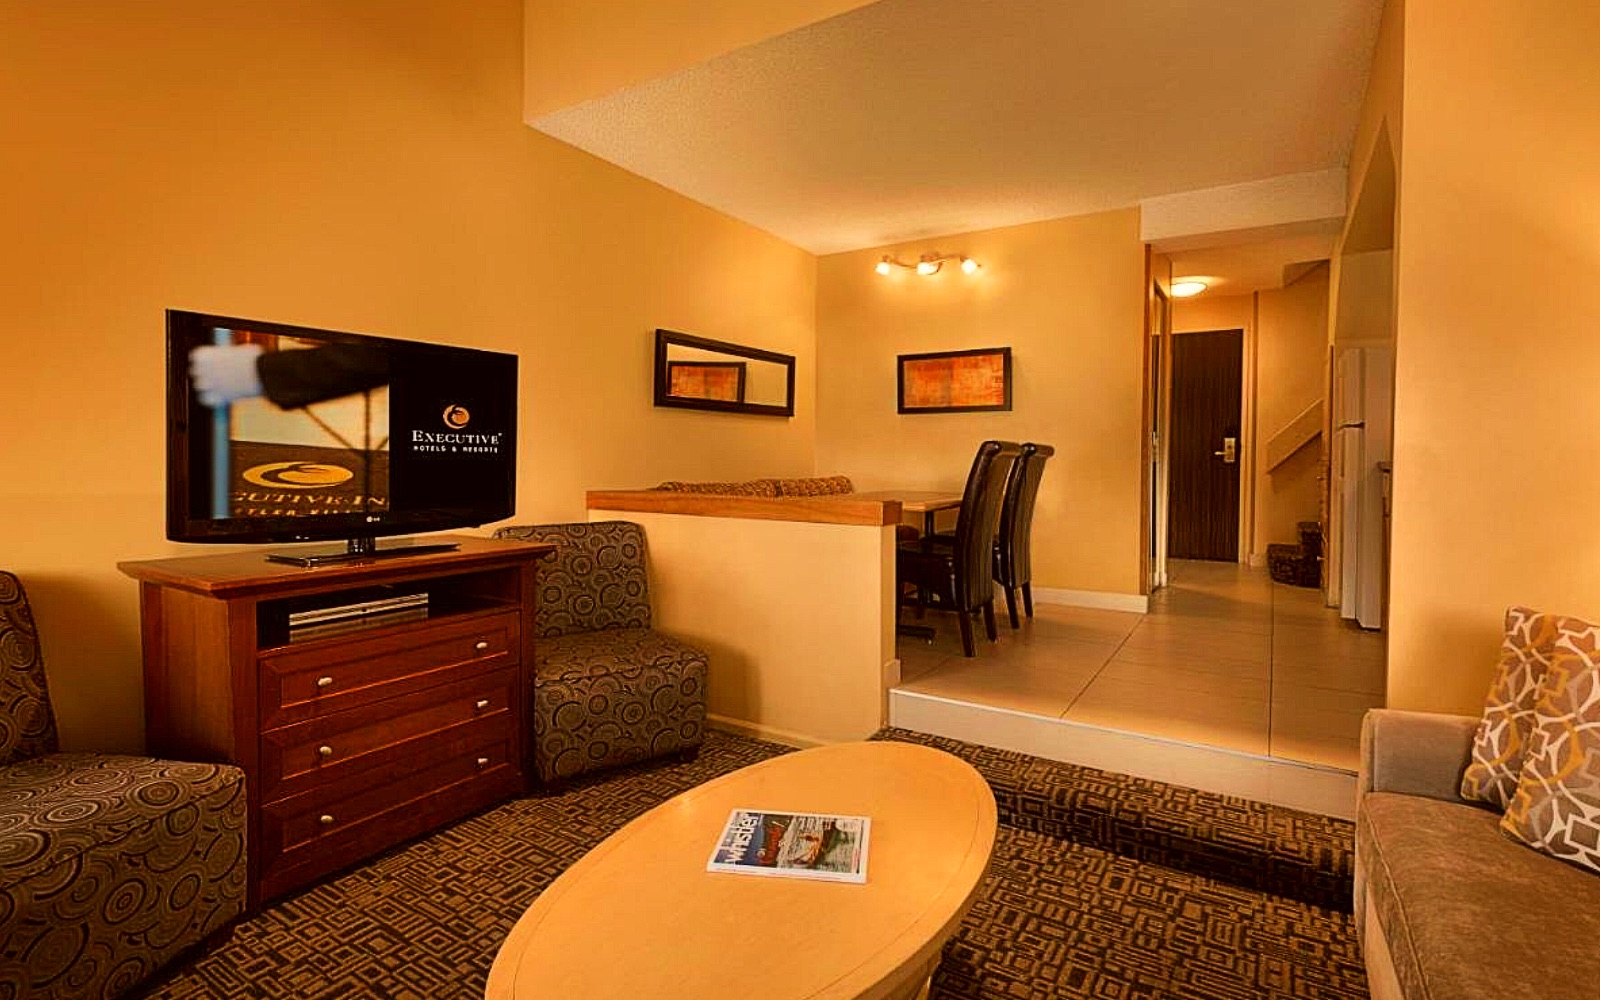 A suite at the Mountainside Hotel by Executive, Whistler Village